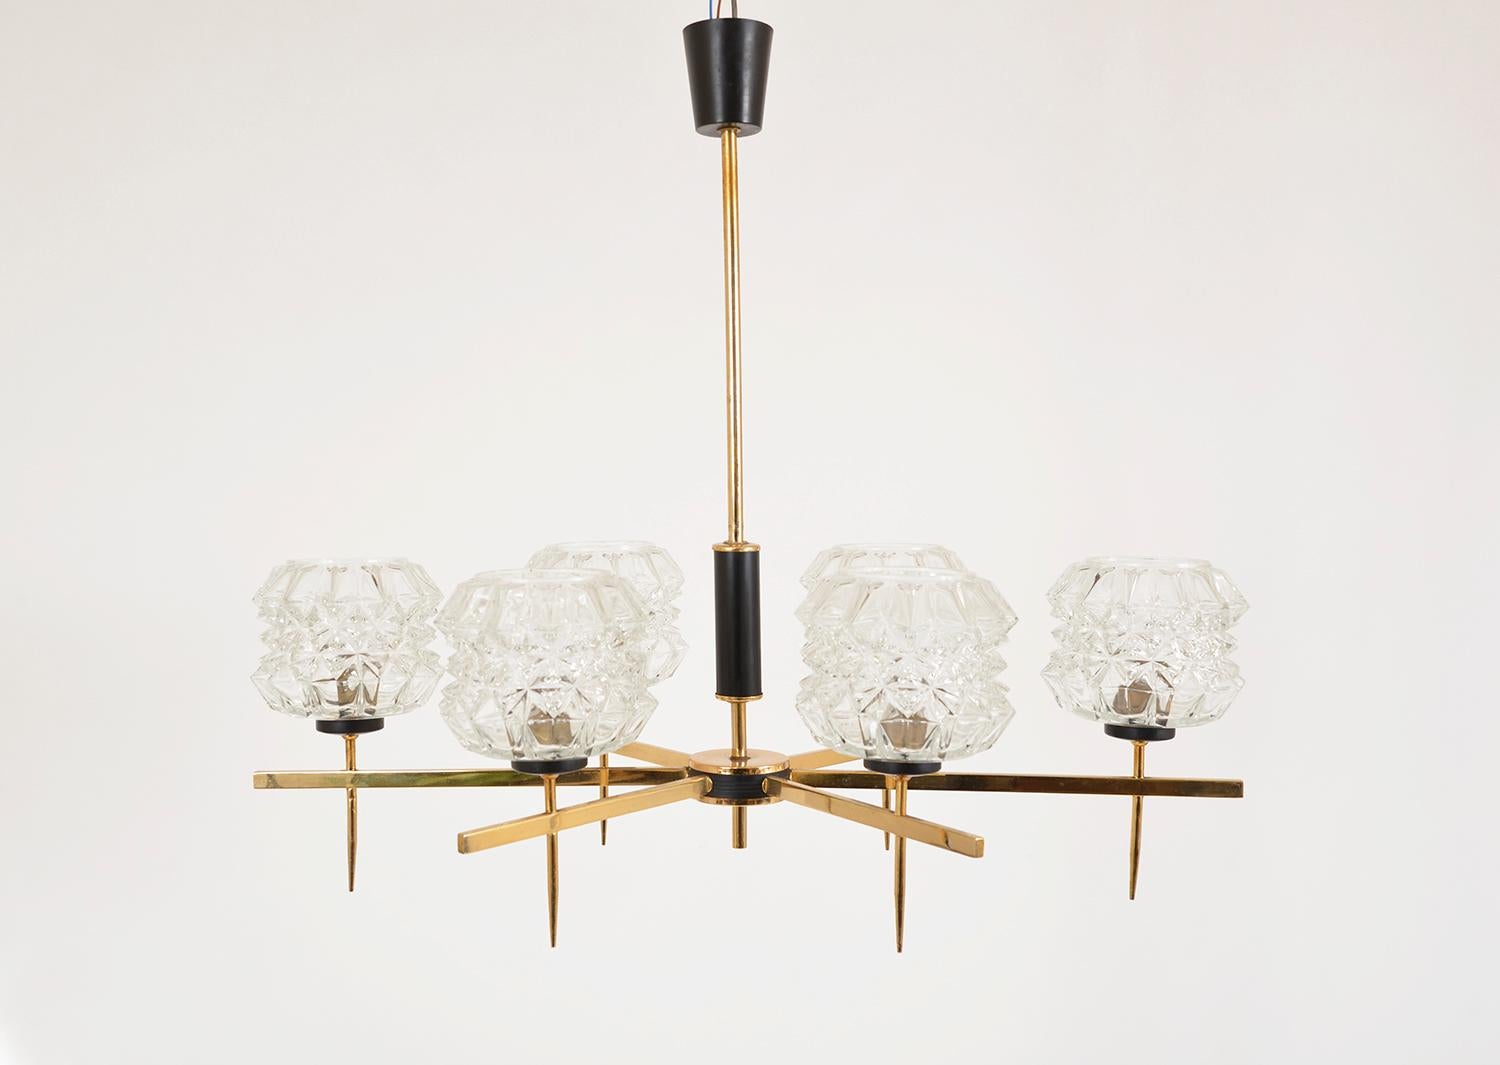 1960s French six-arm pendant chandelier with brass arms, stylish spiked bulb holders and glass lampshades hung from a brass rod with a black plastic ceiling rose. In good working order, however one glass shade has a small hole in it, which doesn’t